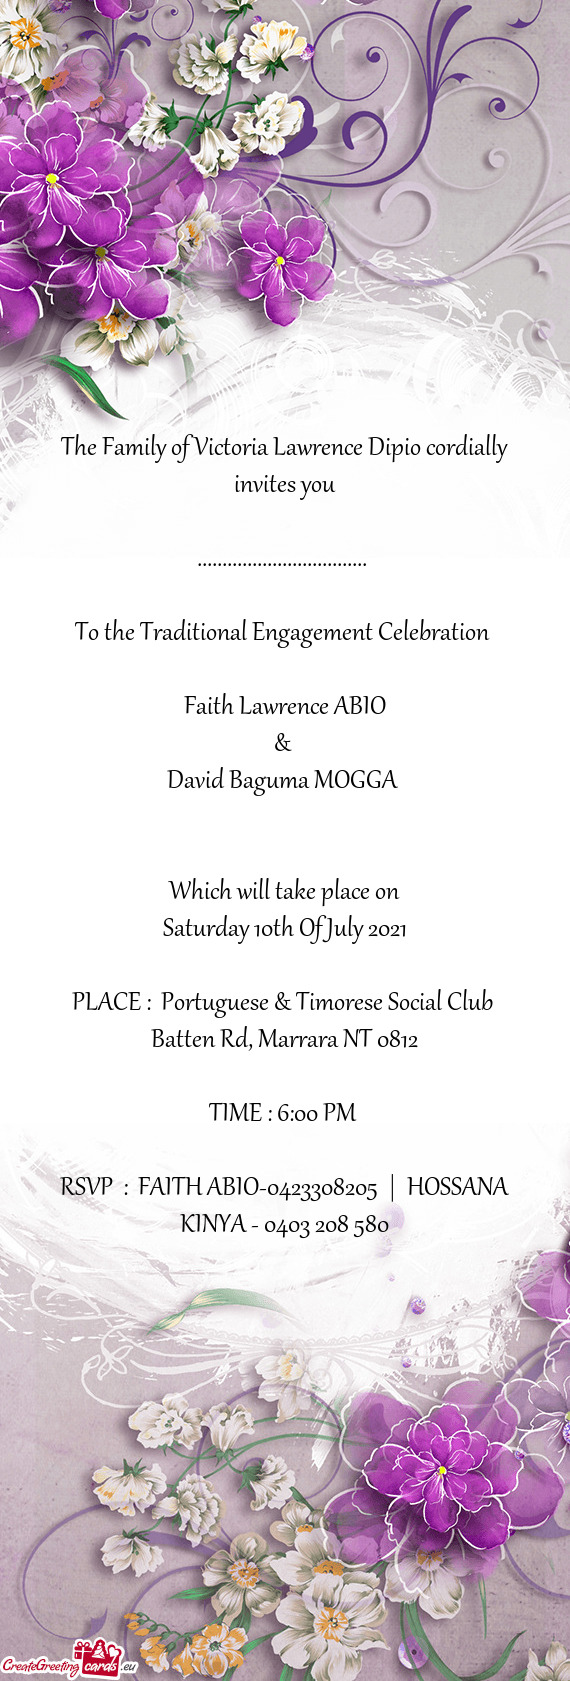 The Family of Victoria Lawrence Dipio cordially invites you